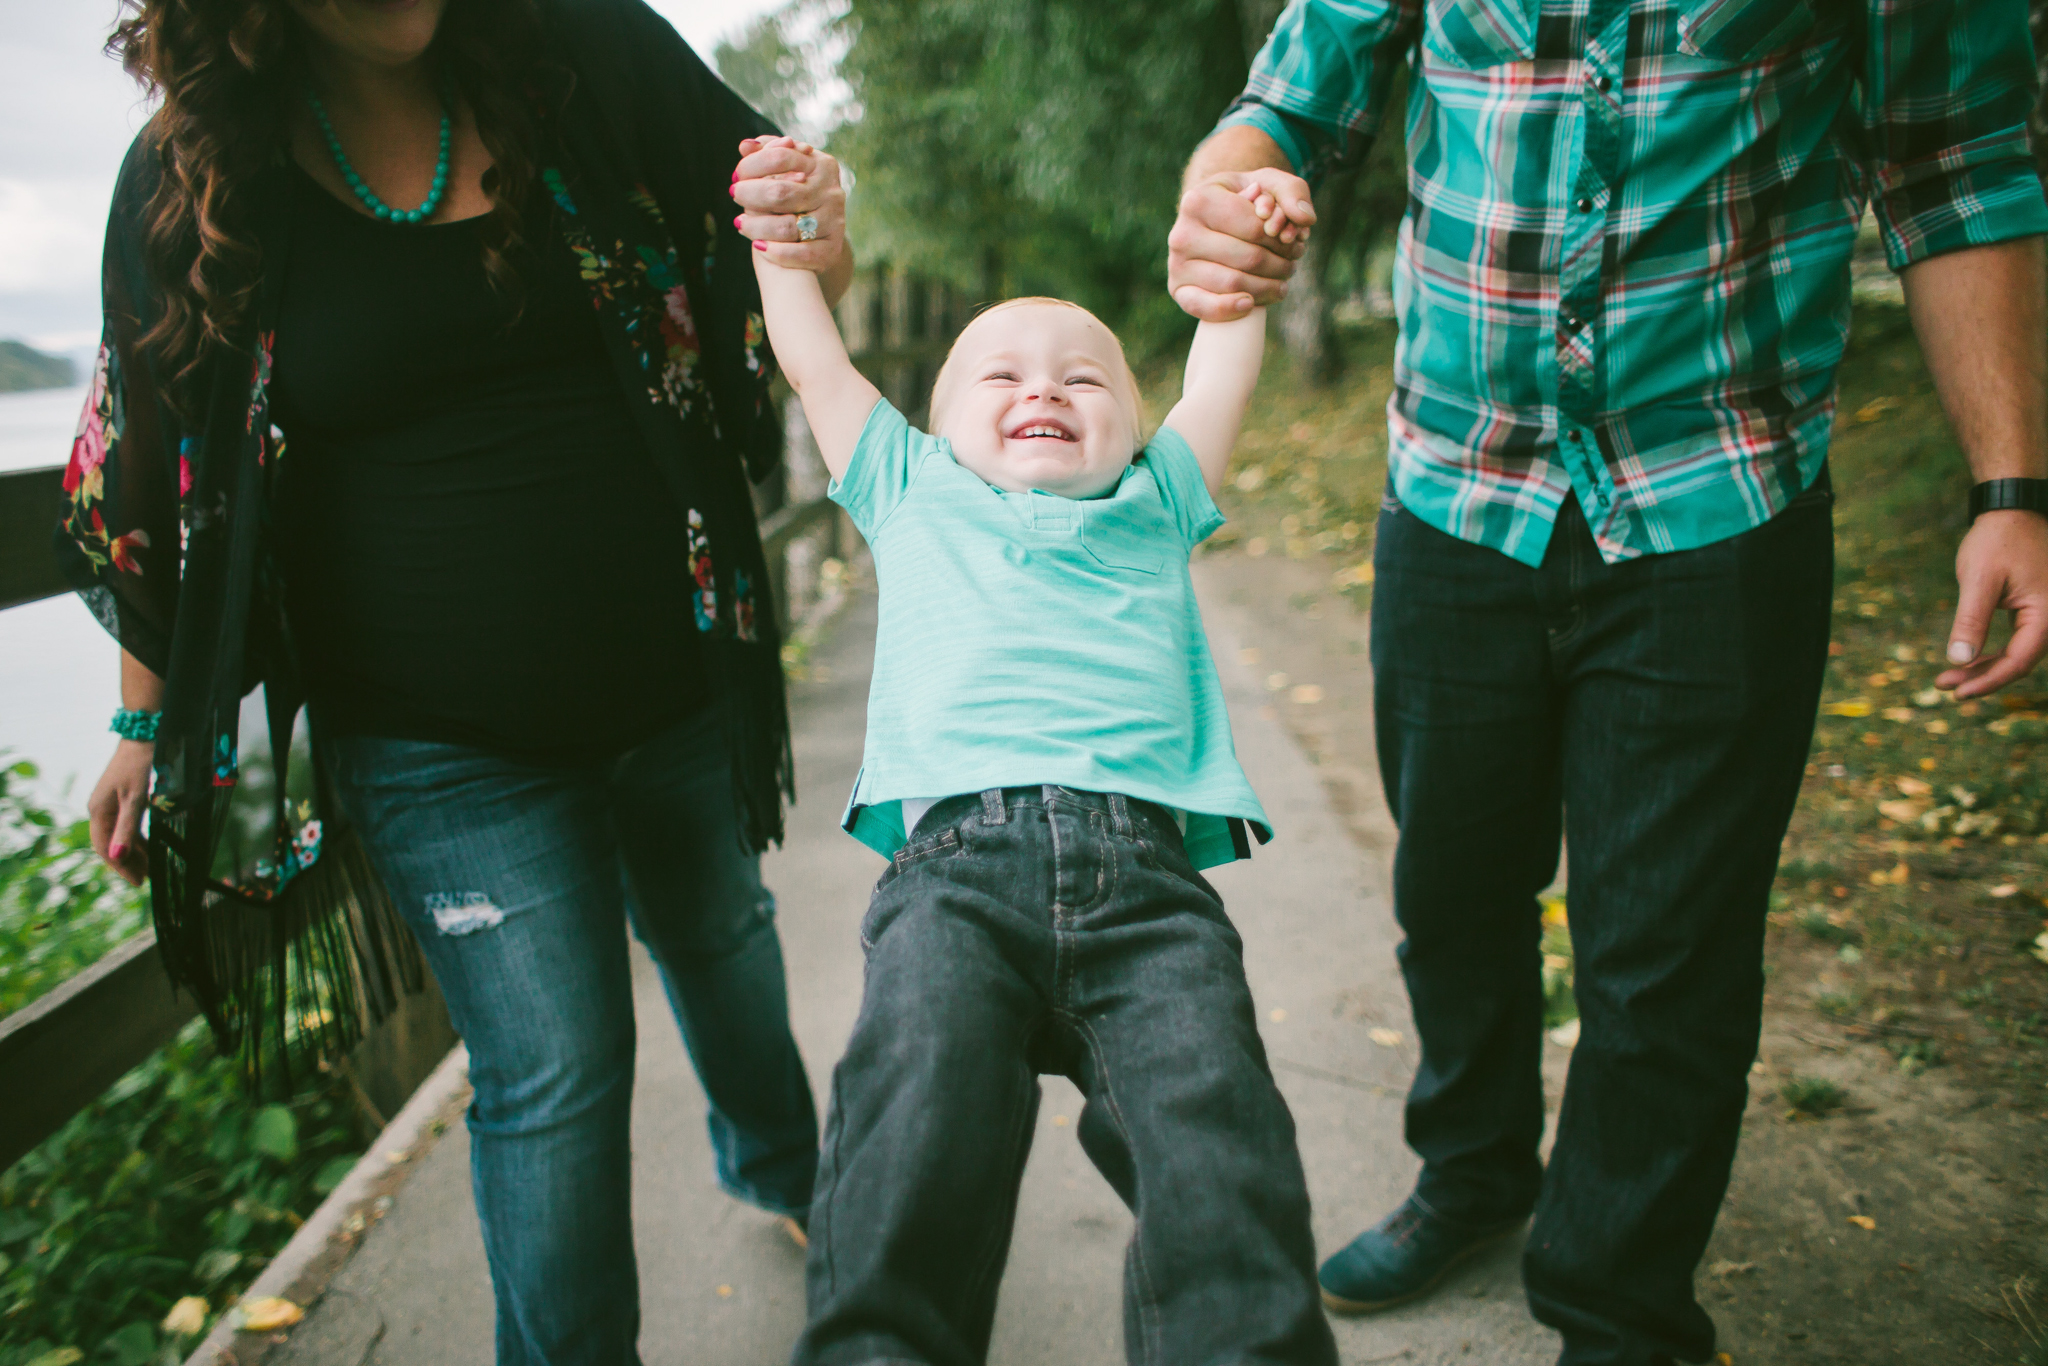 View More: http://michellekarstphotography.pass.us/wilsonfamily2015